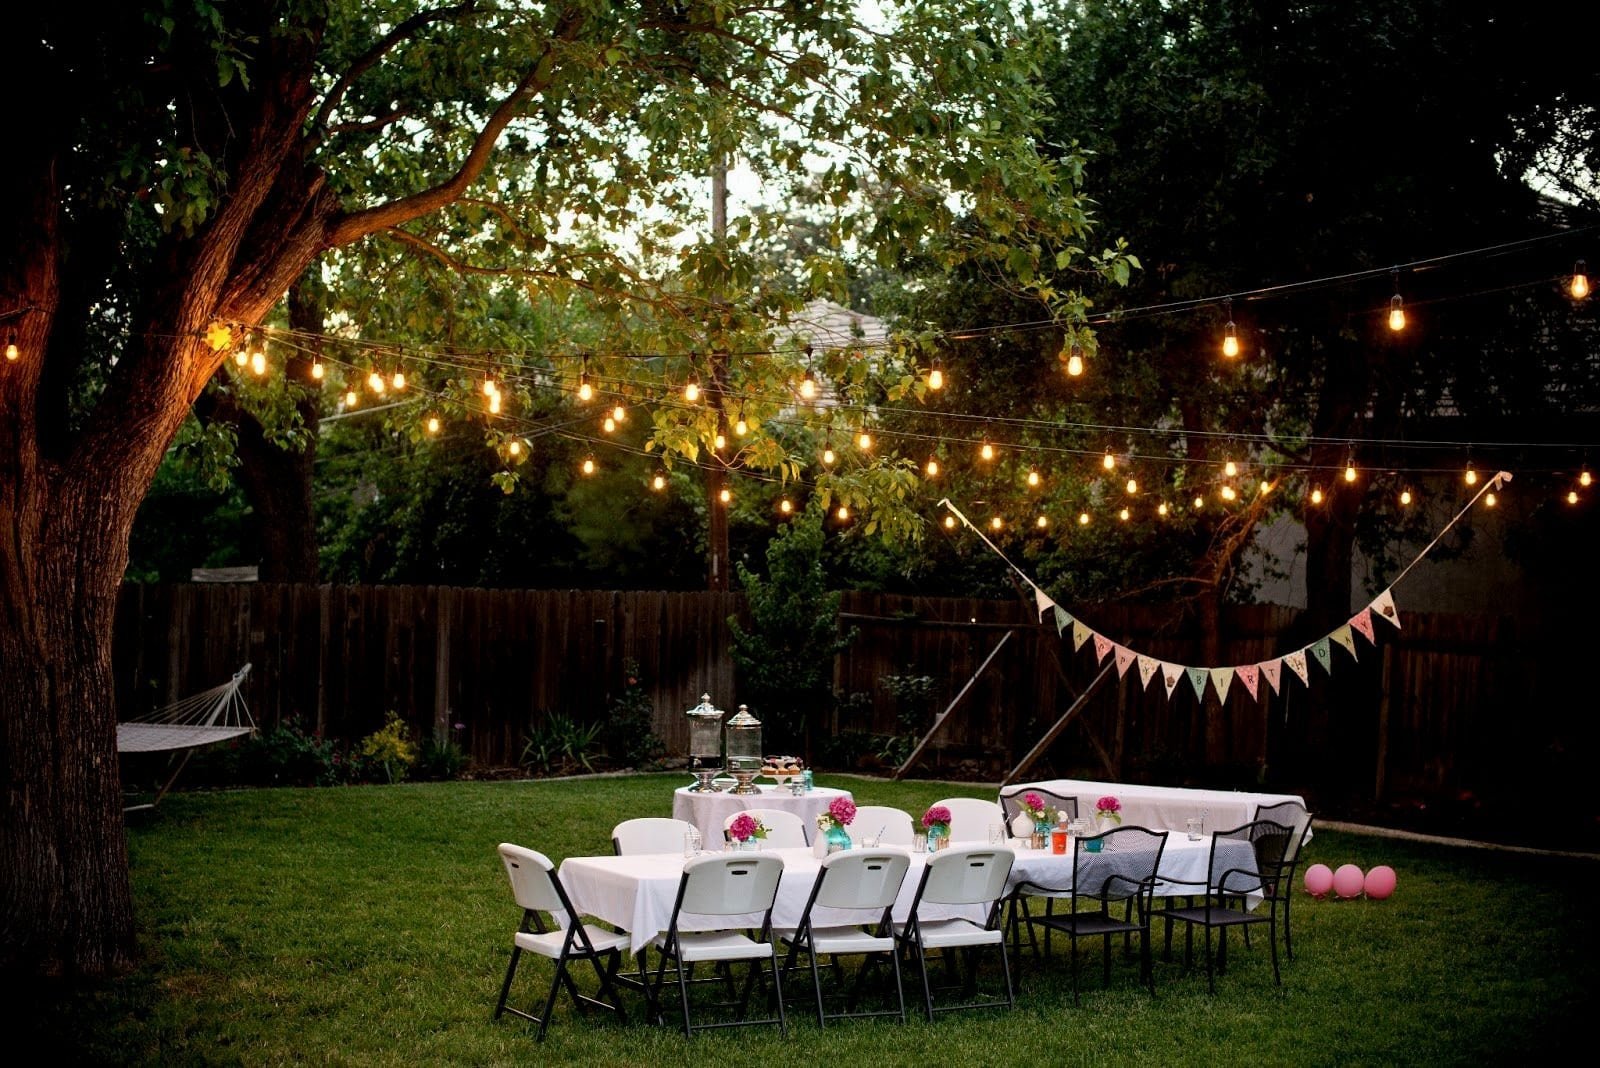 Ideas Of Backyard Birthday Party Decorating Images On Breathtaking